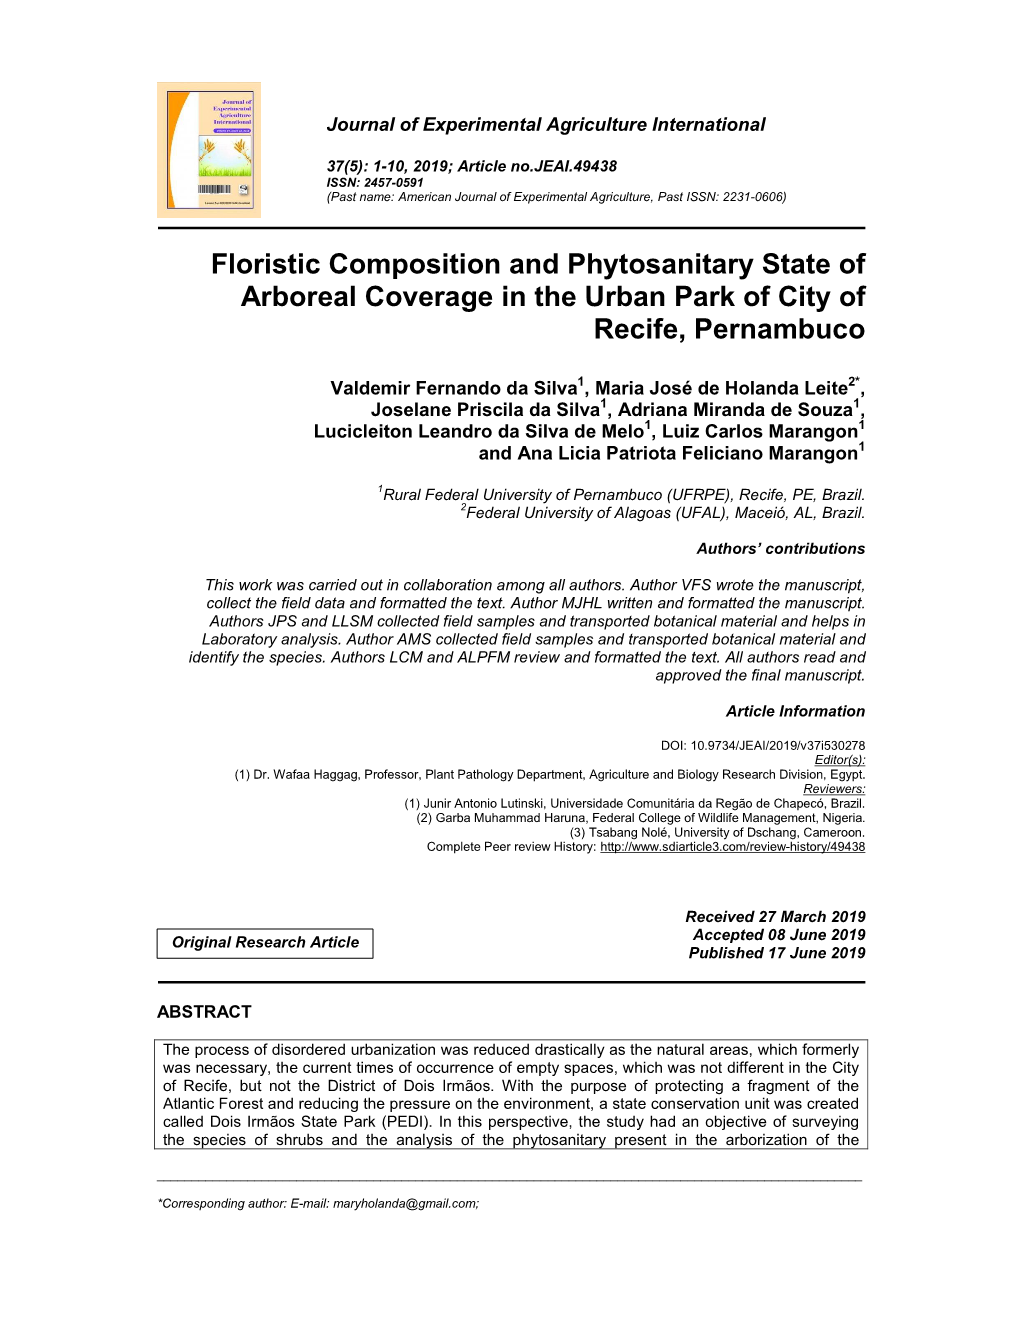 Floristic Composition and Phytosanitary State of Arboreal Coverage in the Urban Park of City of Recife, Pernambuco